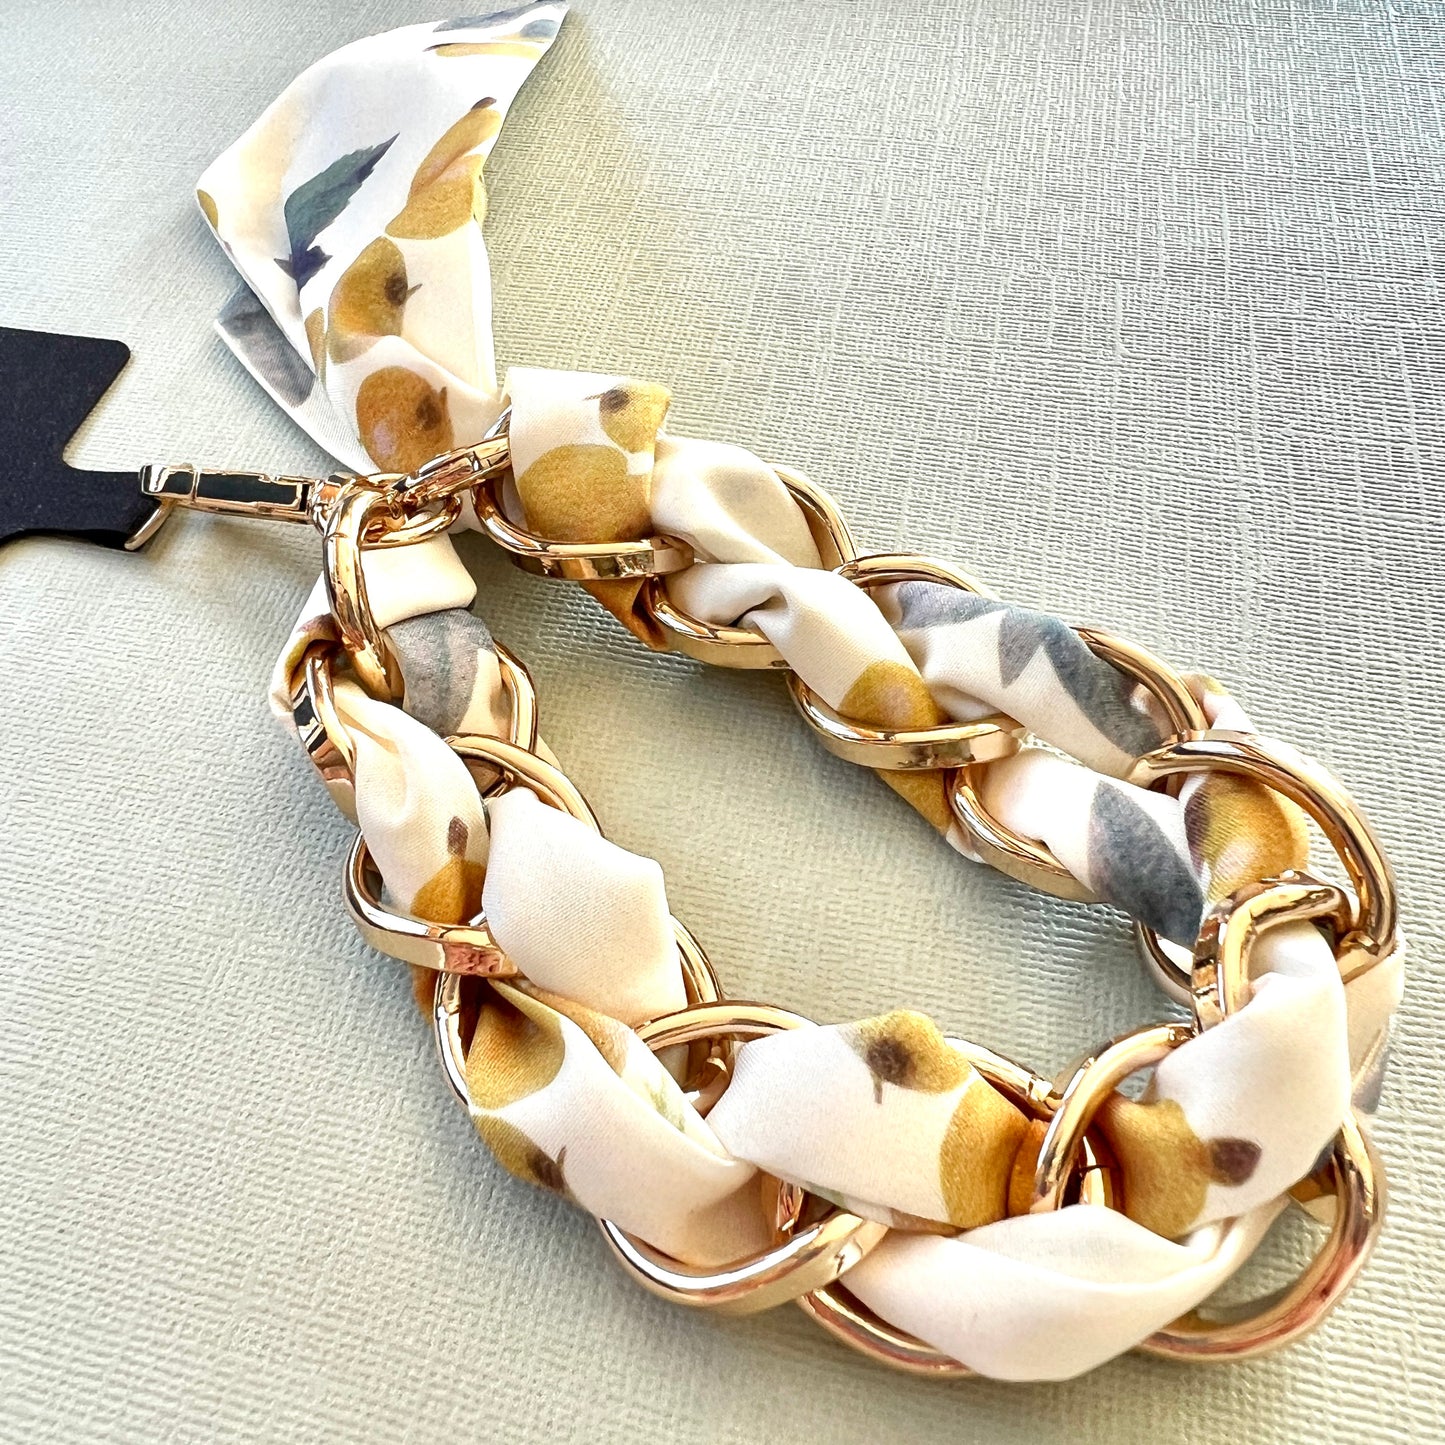 Wristlet Phone Chain I Silk Scarf (Gold Accents)